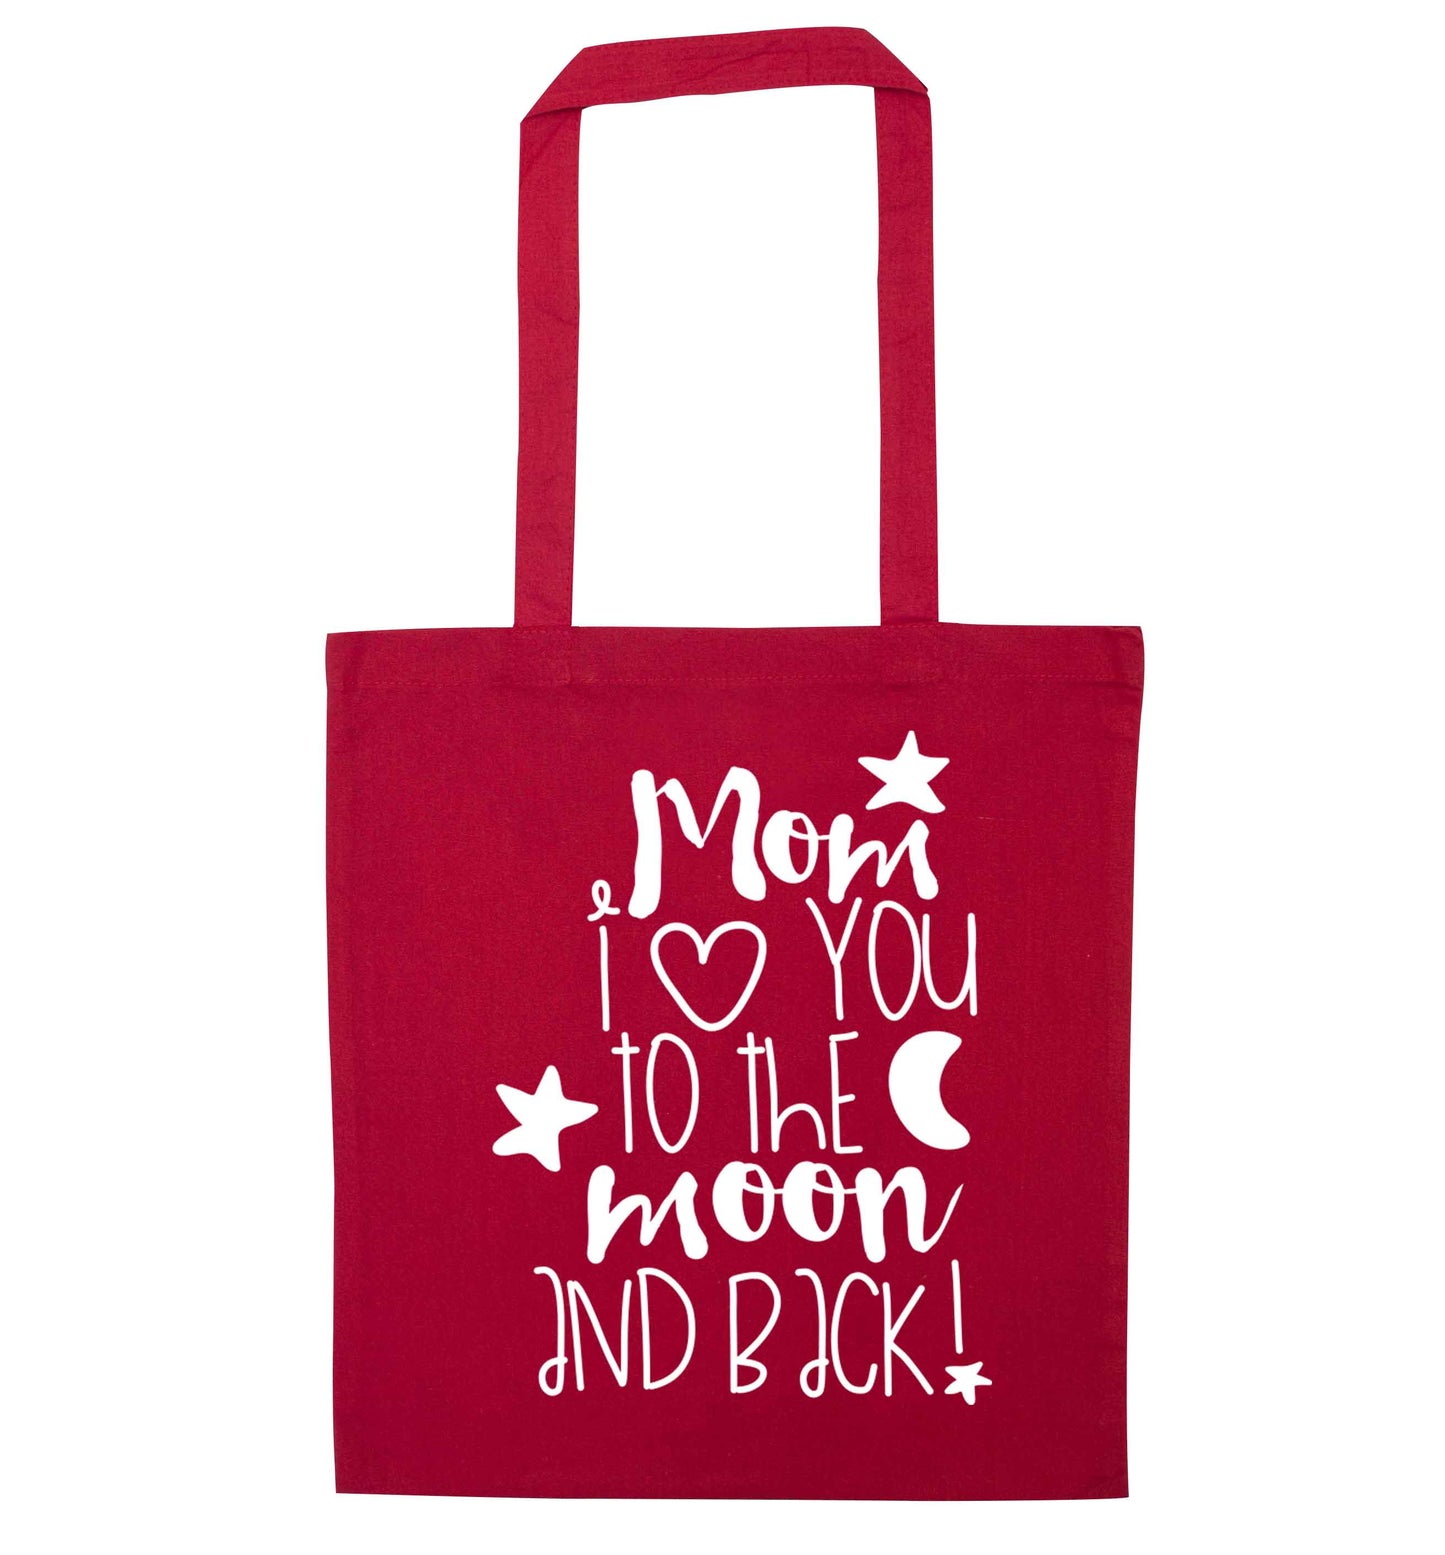 Mom I love you to the moon and back red tote bag